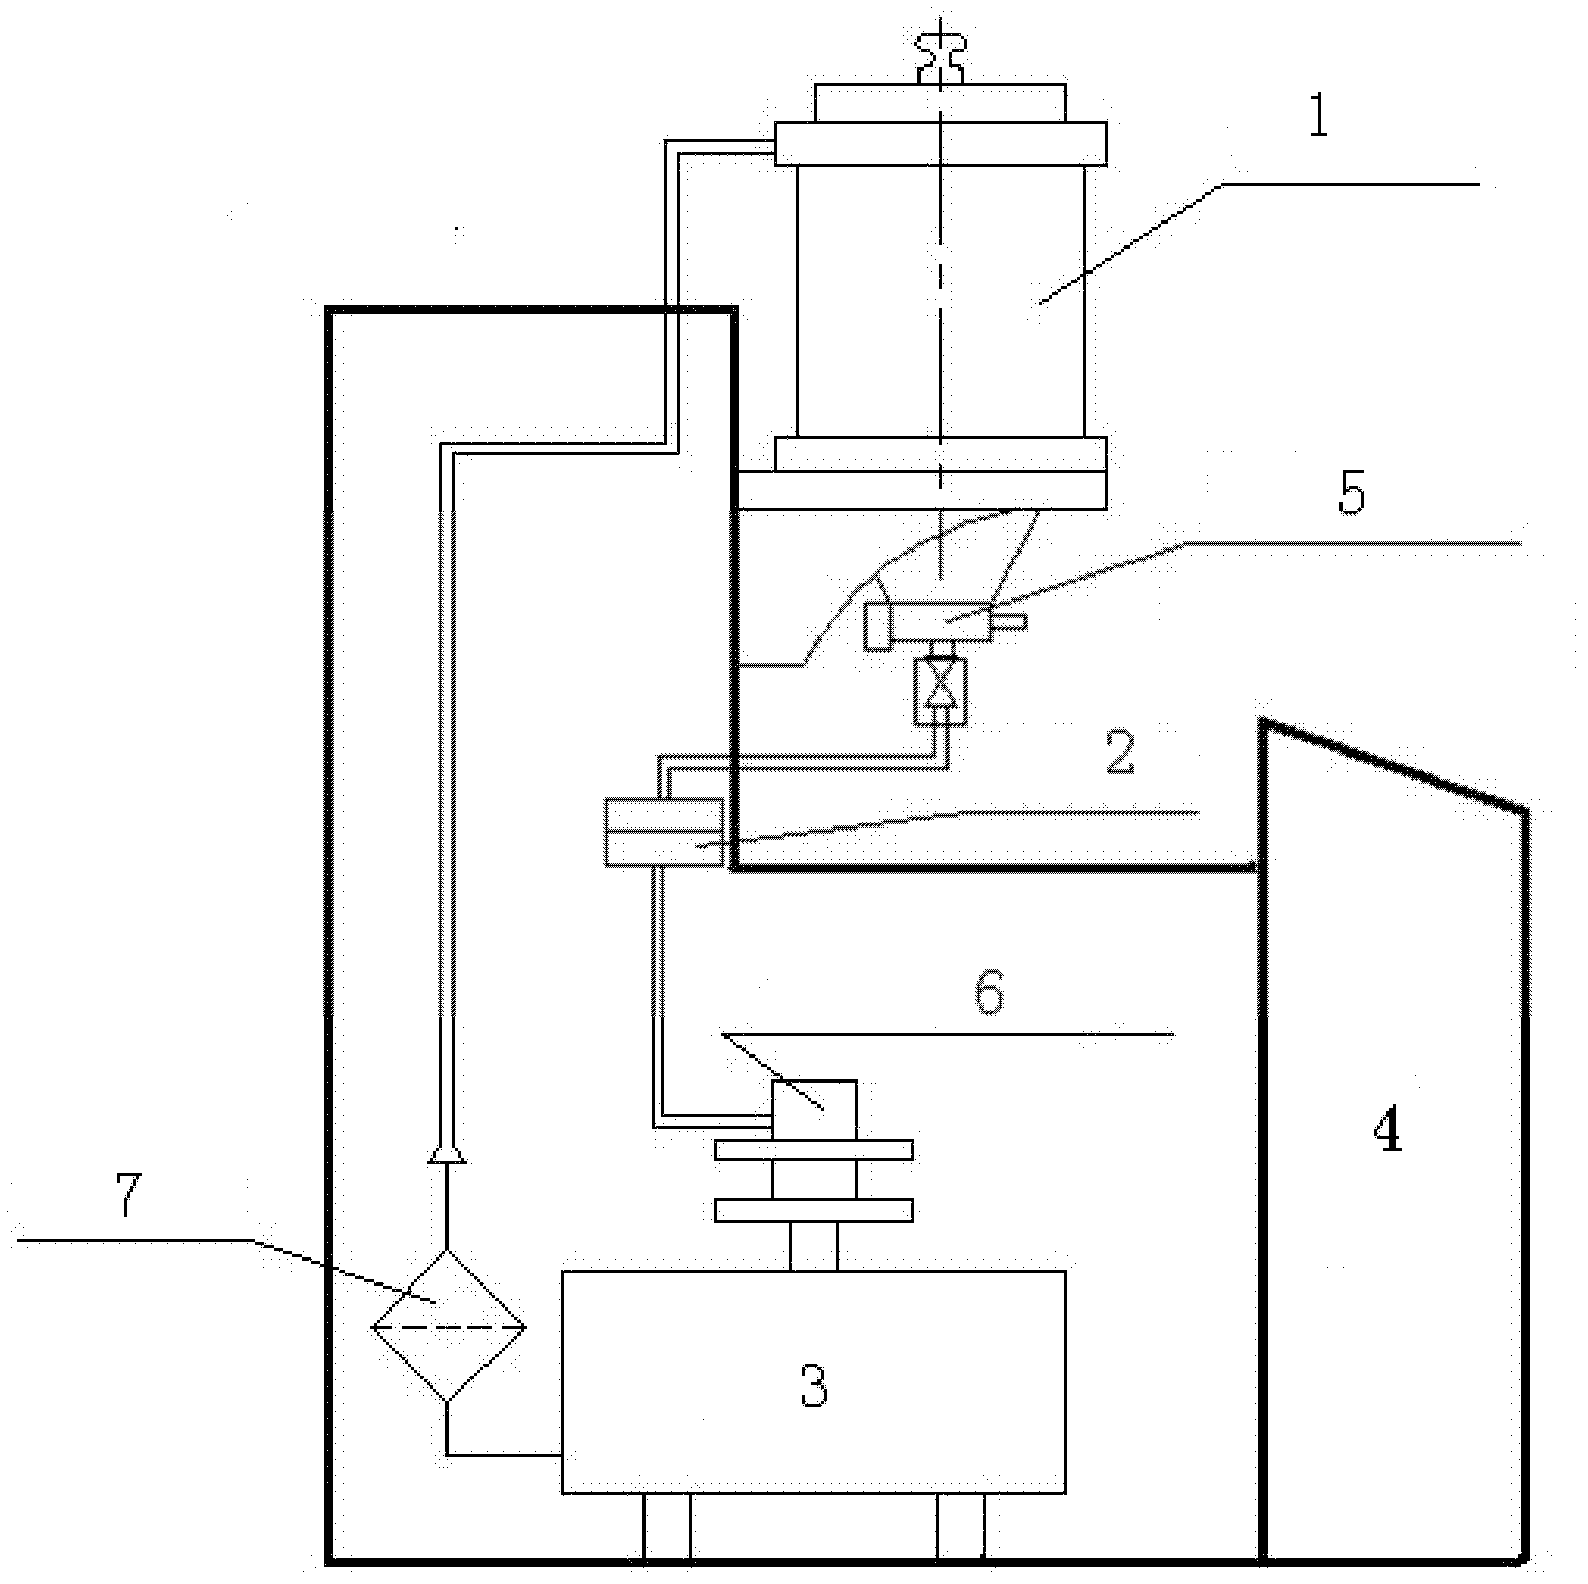 Monitoring method of large particle metal abrasive dust in machine lubrication system